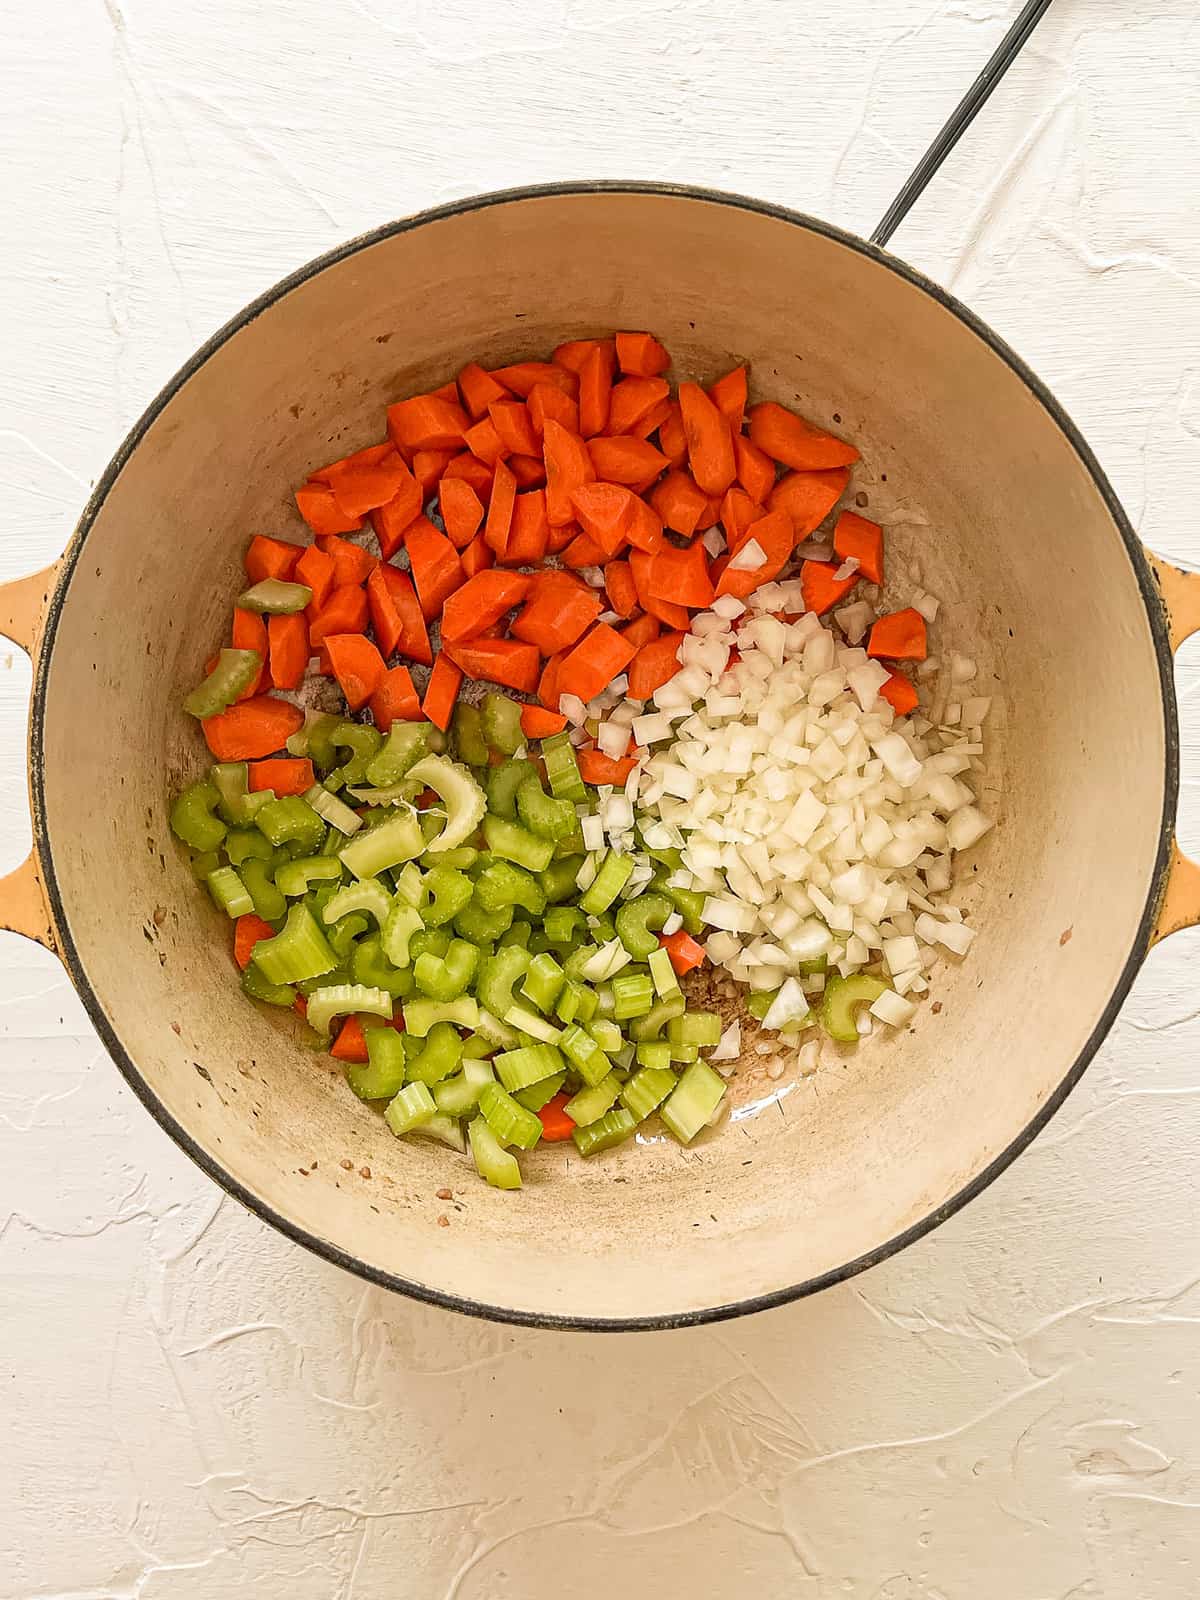 Chopped carrots, onions, and celery in a dutch oven.